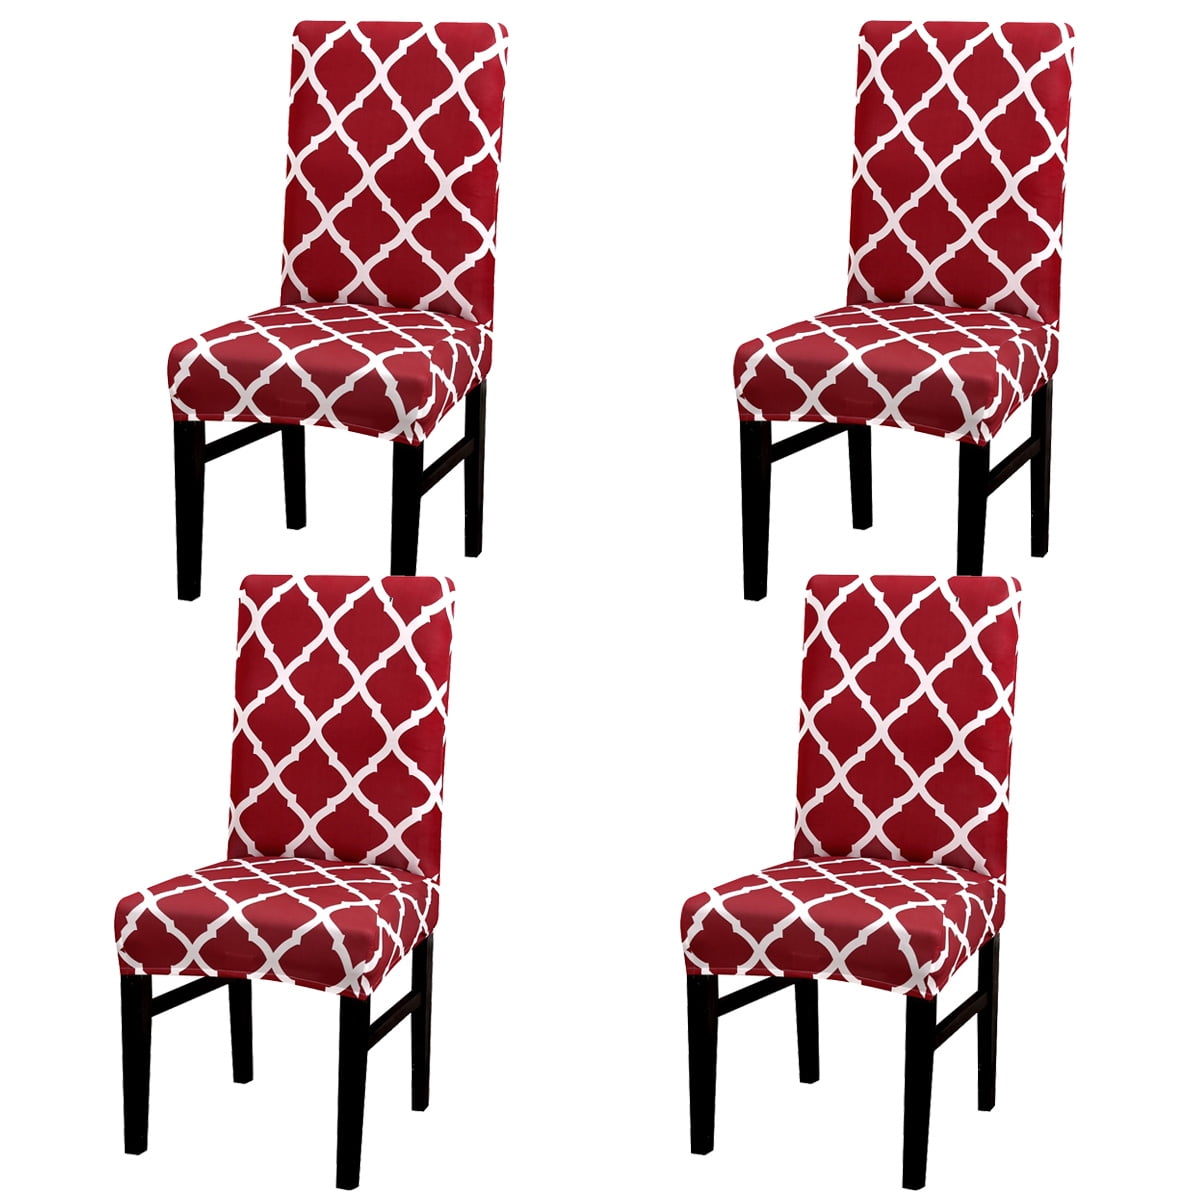 Details about   Dining Chair Seat Covers Slip Stretch Spandex Wedding Banquet Party Removable 